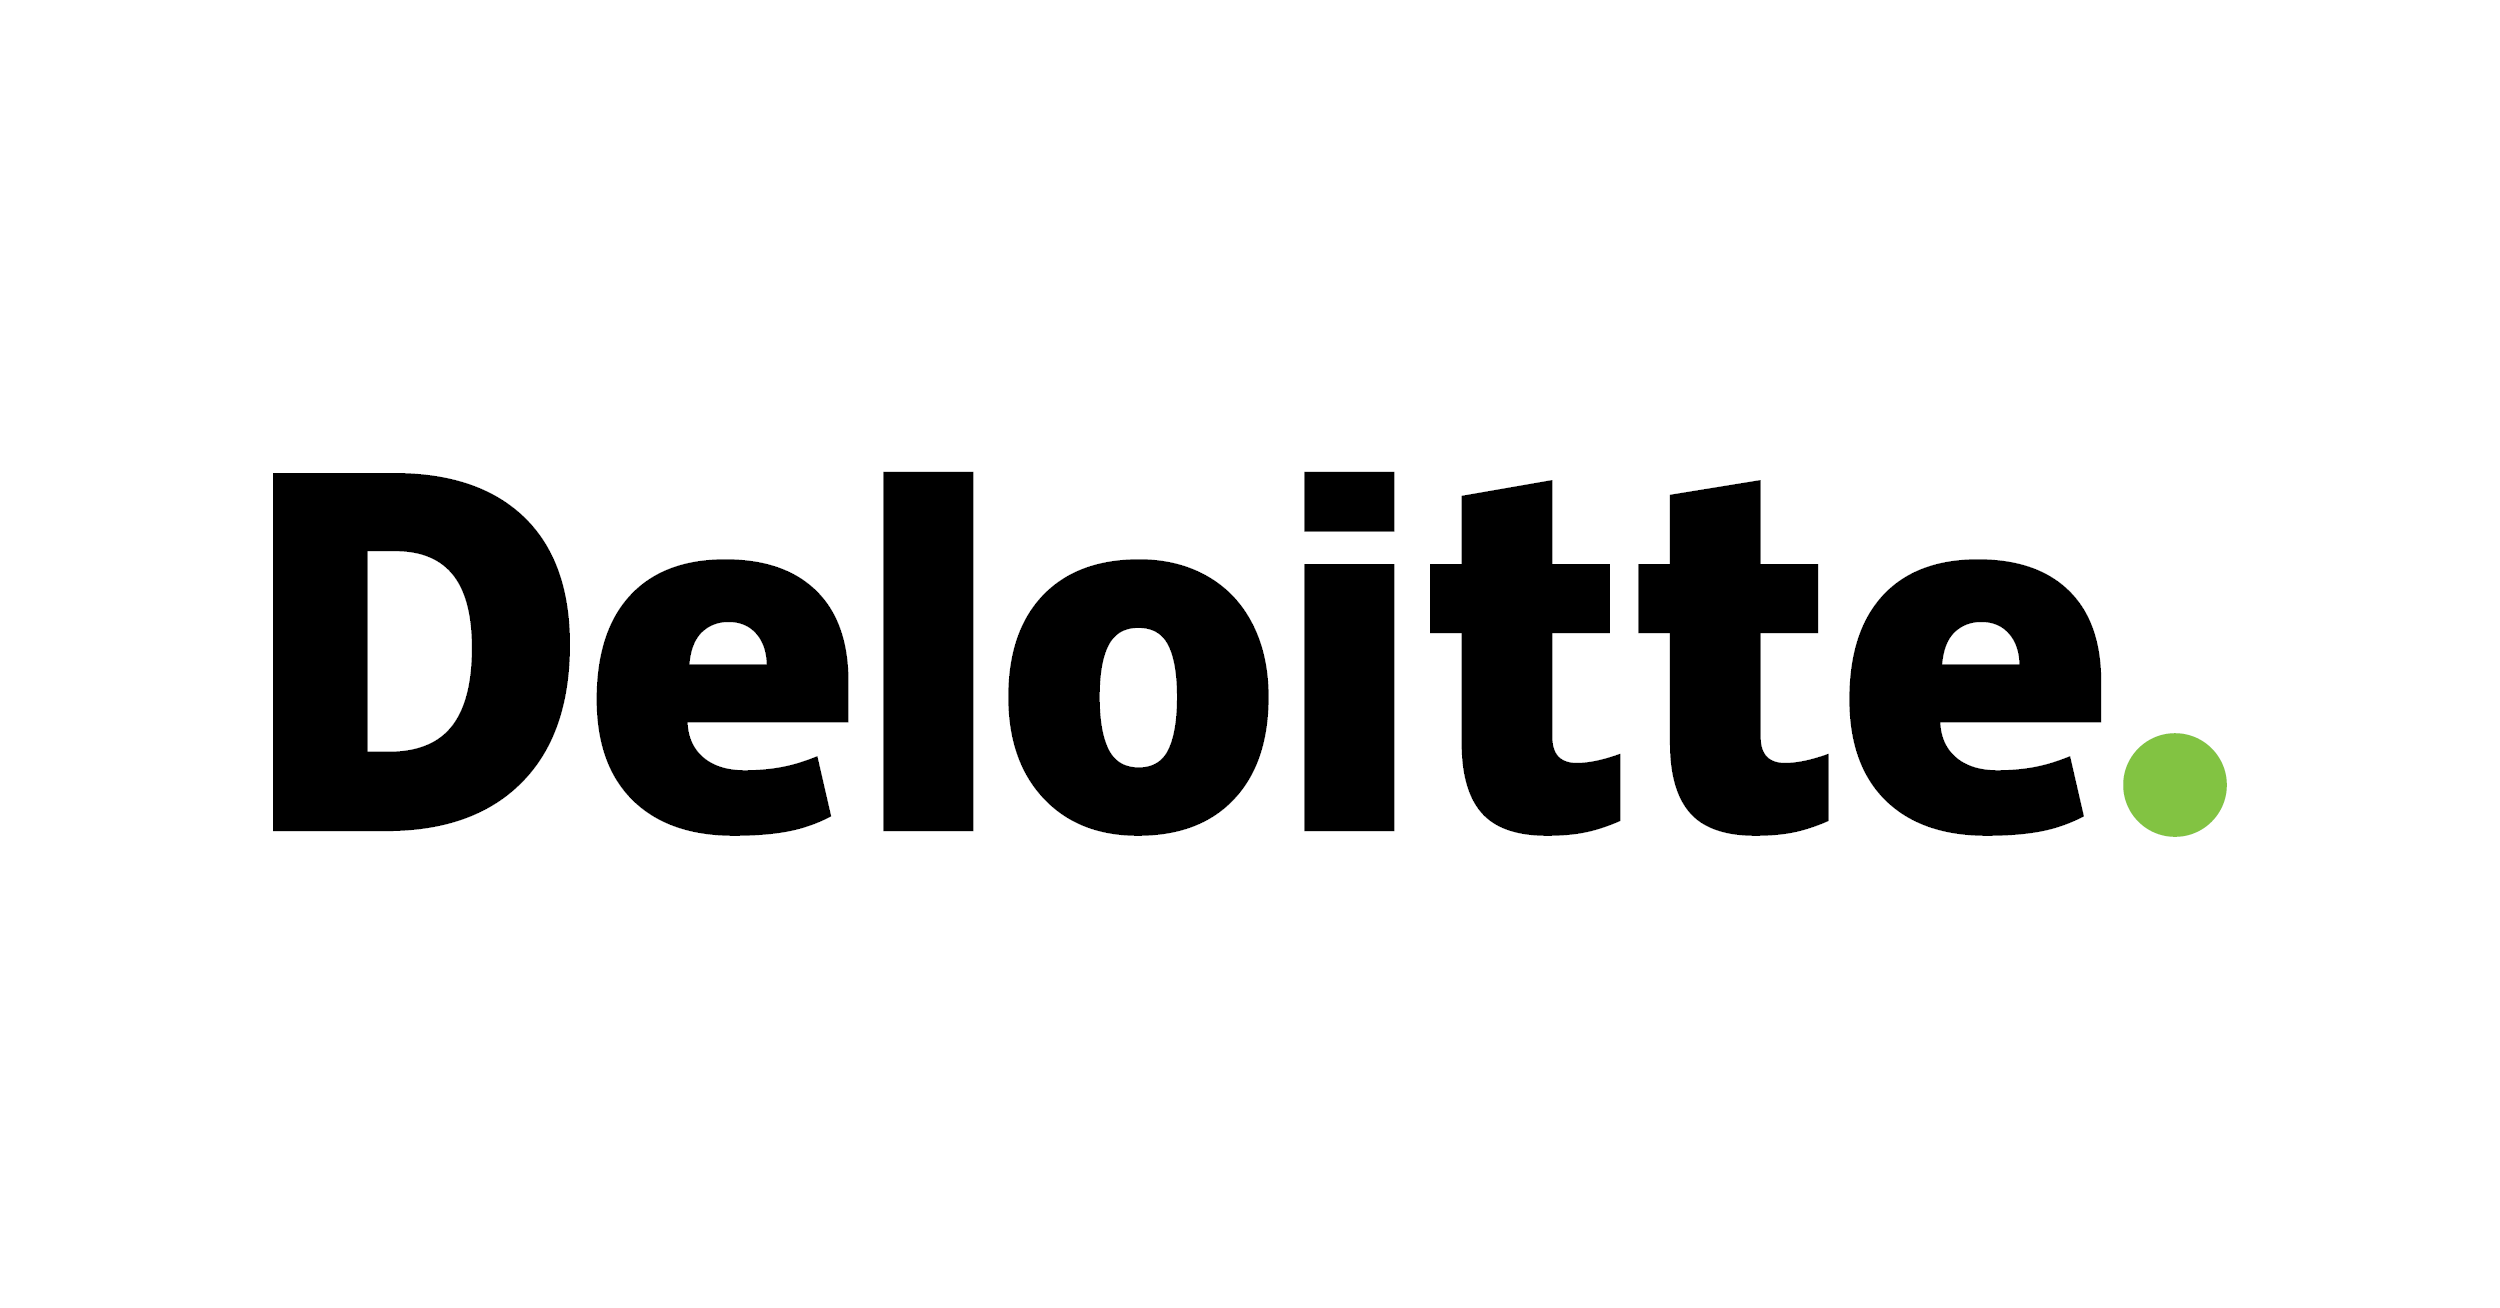 Working at Deloitte